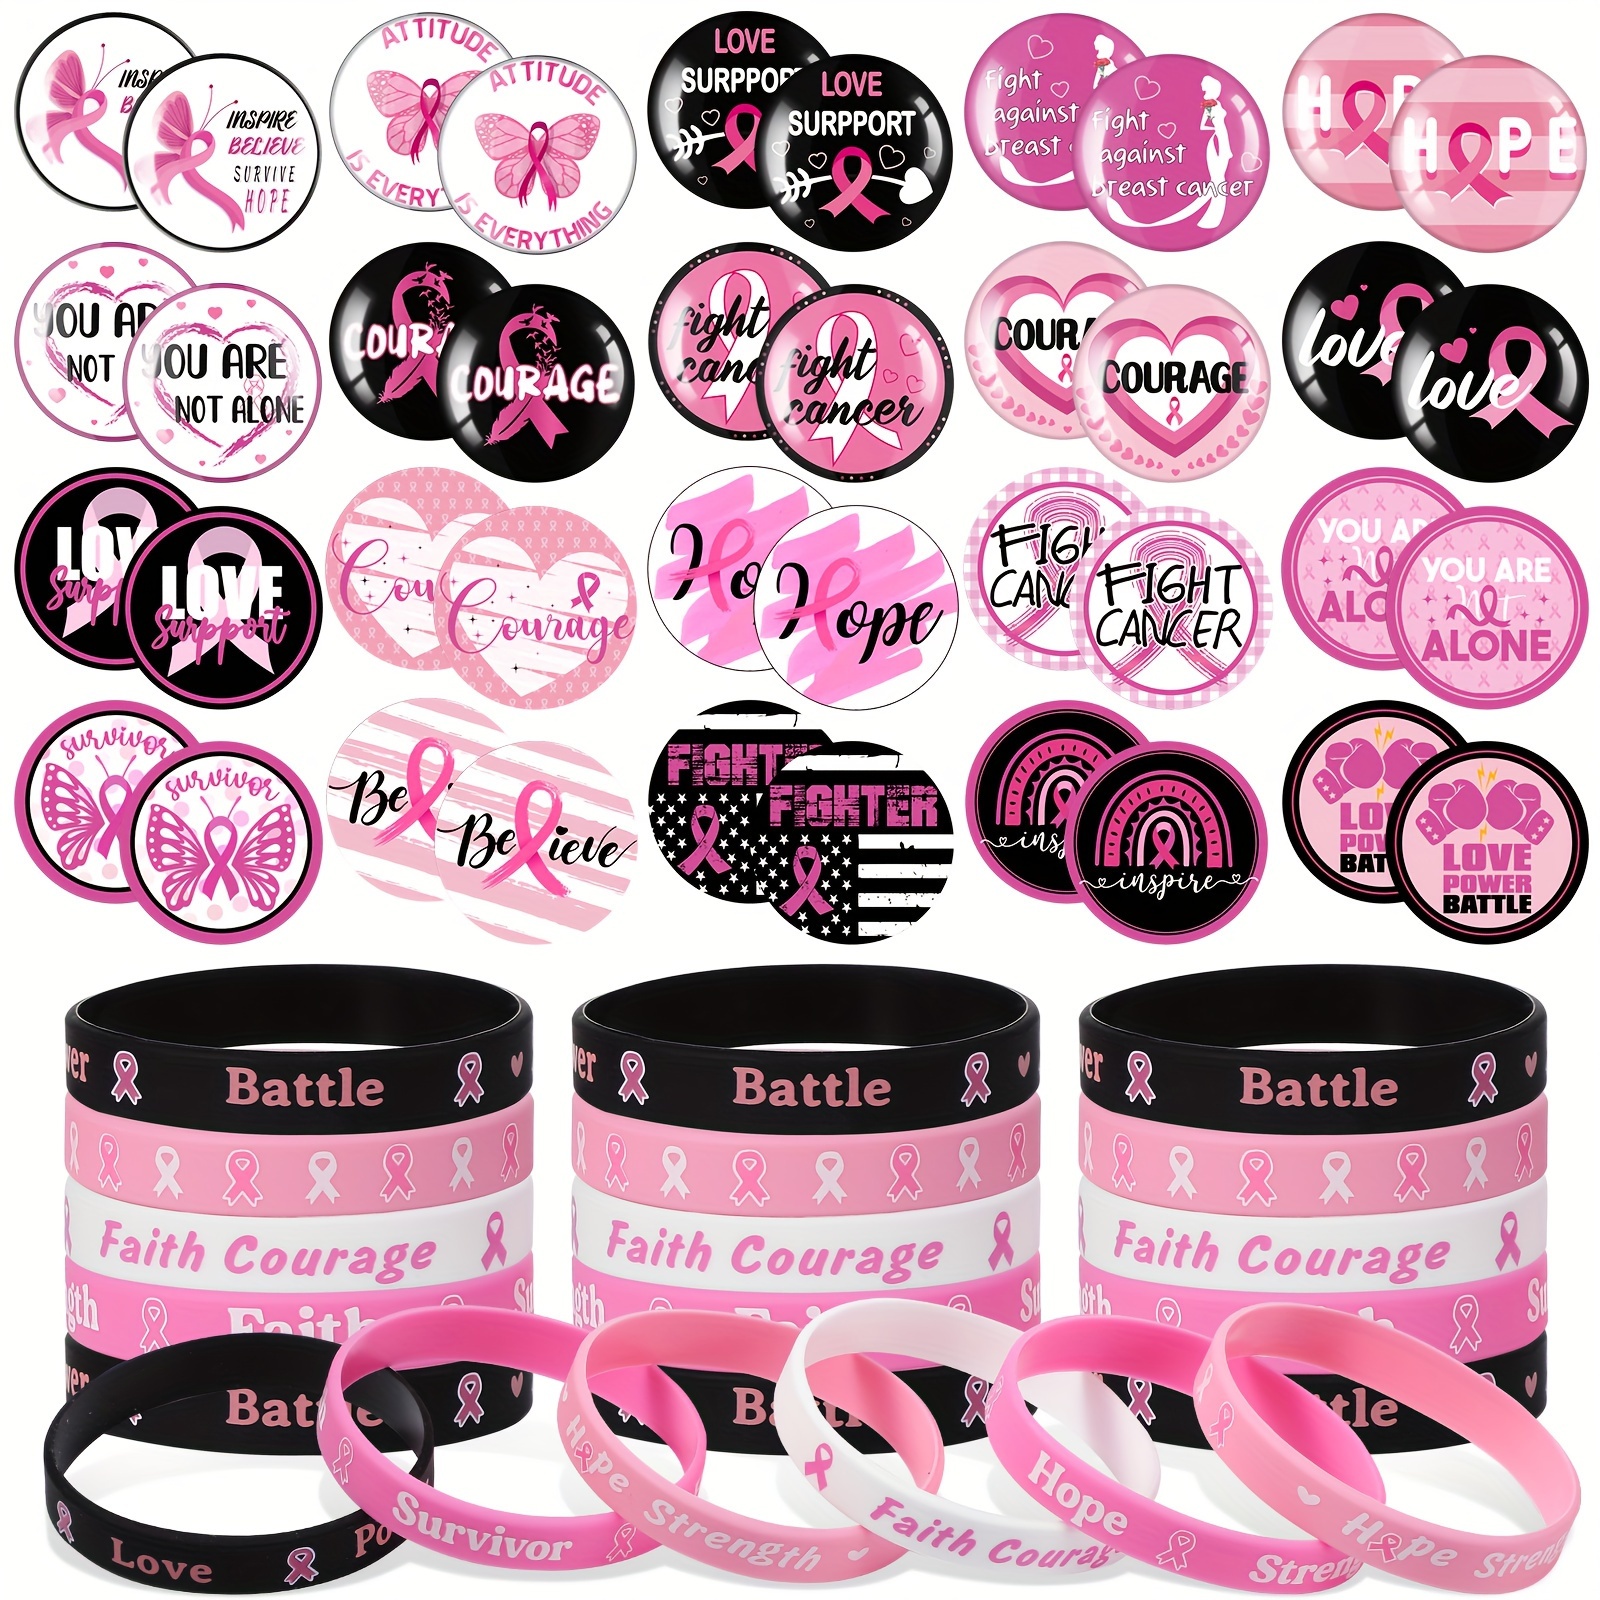 

60 Pieces Breast Cancer Awareness Party Supplies, Breast Cancer Wristbands Bracelets And Plastic Button Badges For Strength Hope Faith Courage Survivor Party Supplies